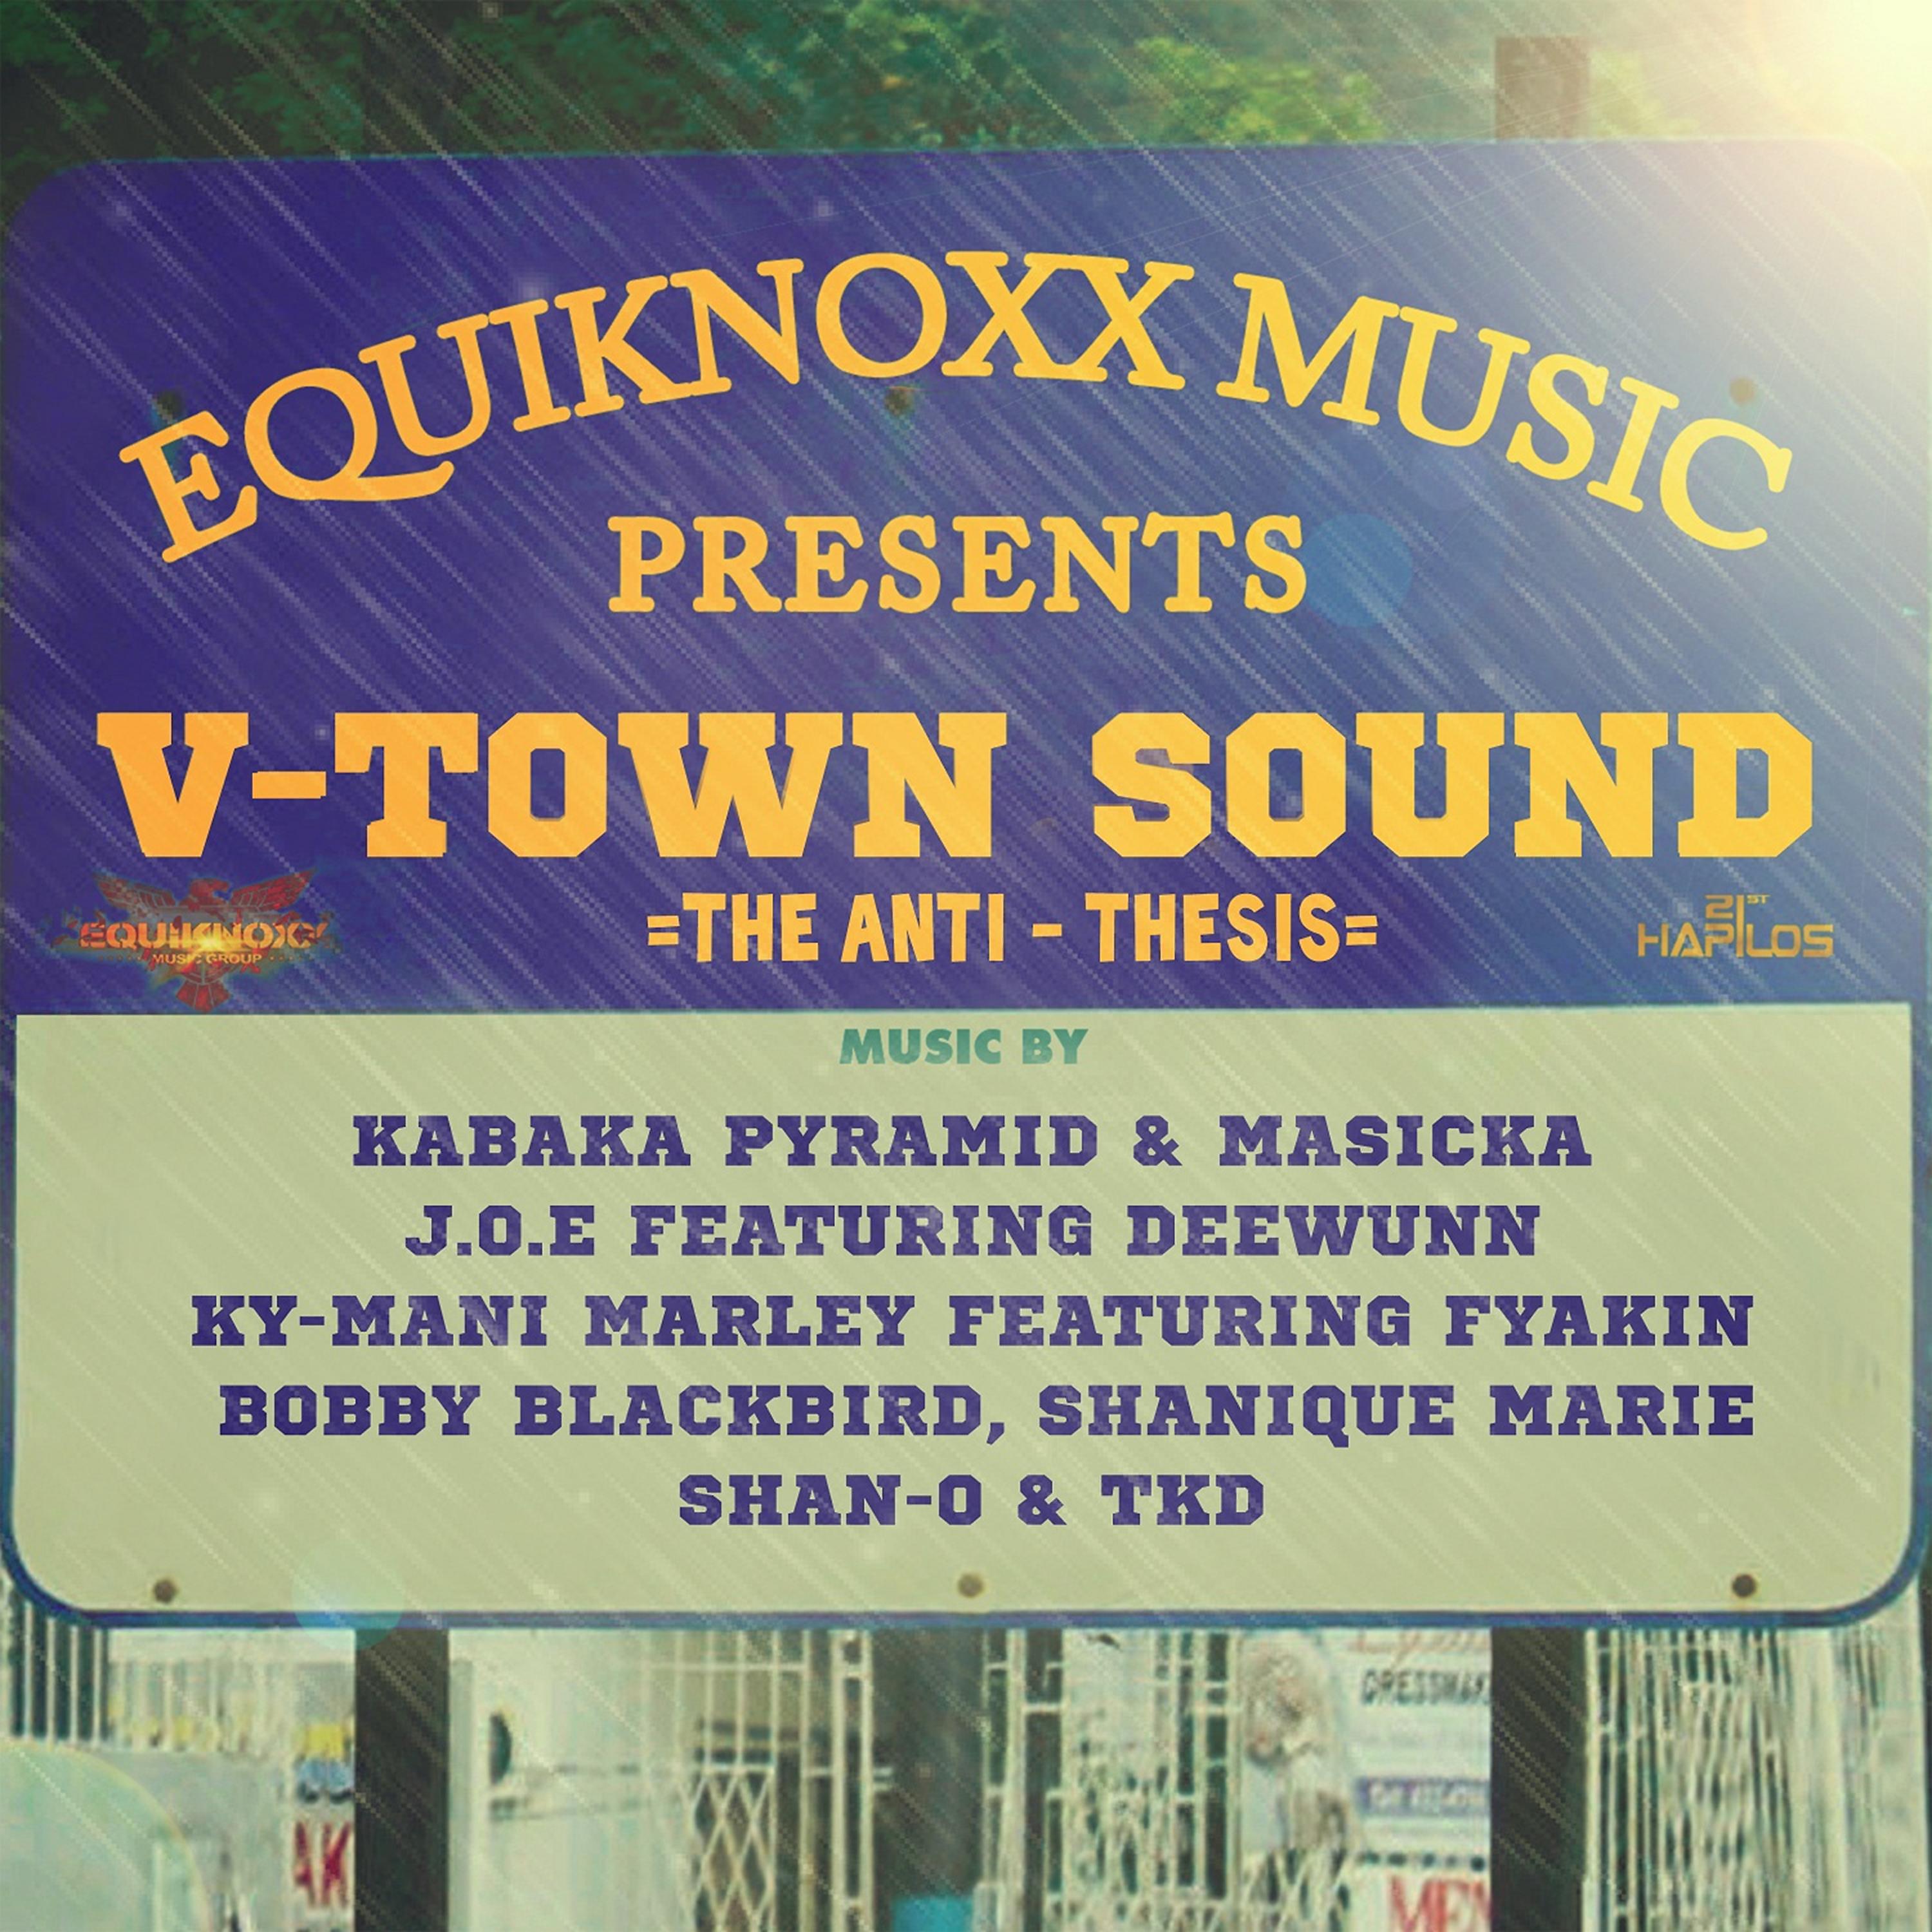 Постер альбома Equiknoxx Music Presents V-Town Sound: The Anti-Thesis